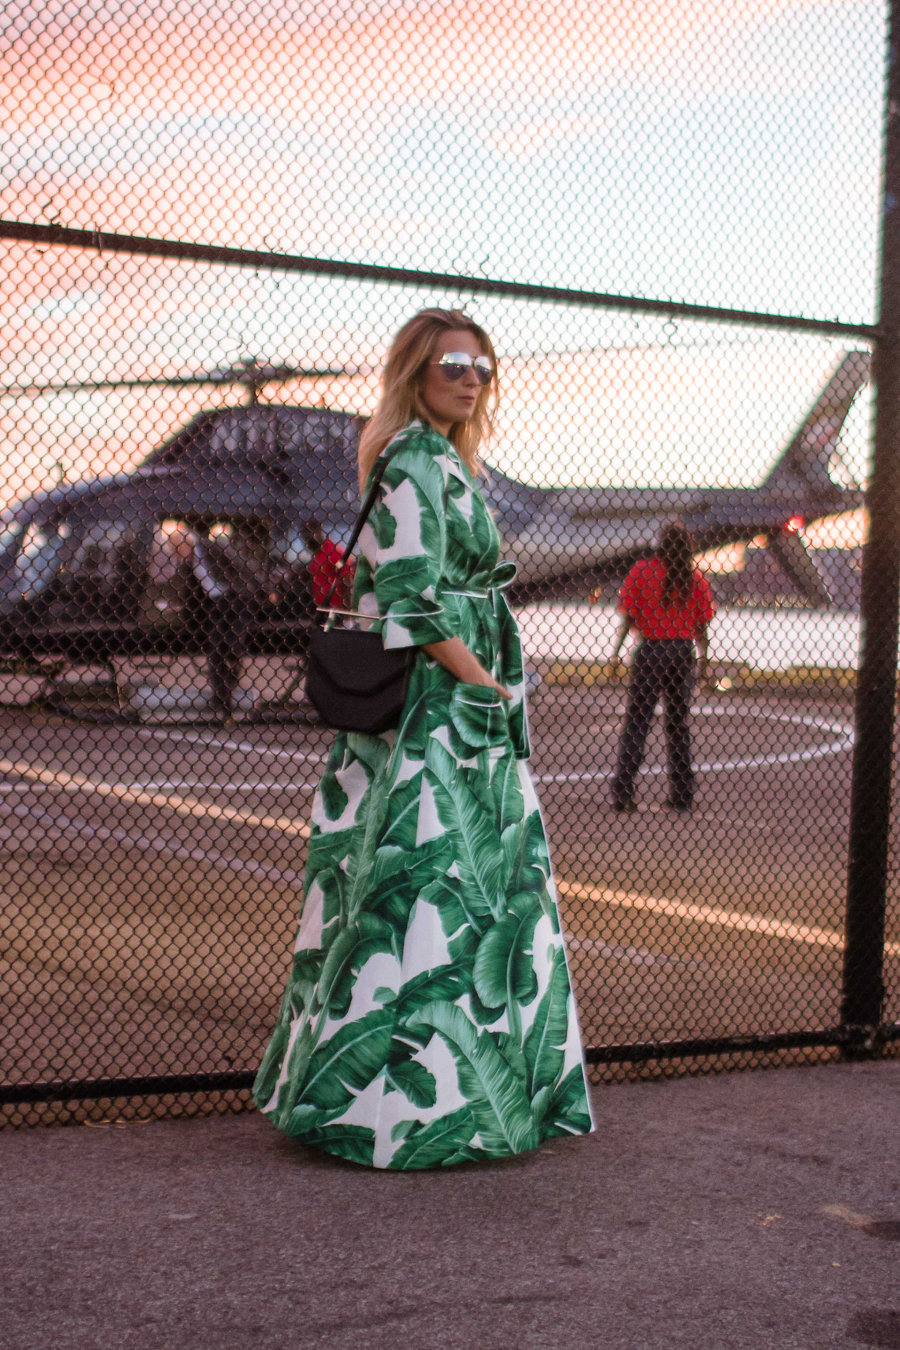 sabrina-chakici-clutch-and-carry-on-clutch-carry-on-uk-travel-blogger-nyfw-isa-arfen-pink-ress-gucci-silver-shoes-net-a-porter-helicopter-11